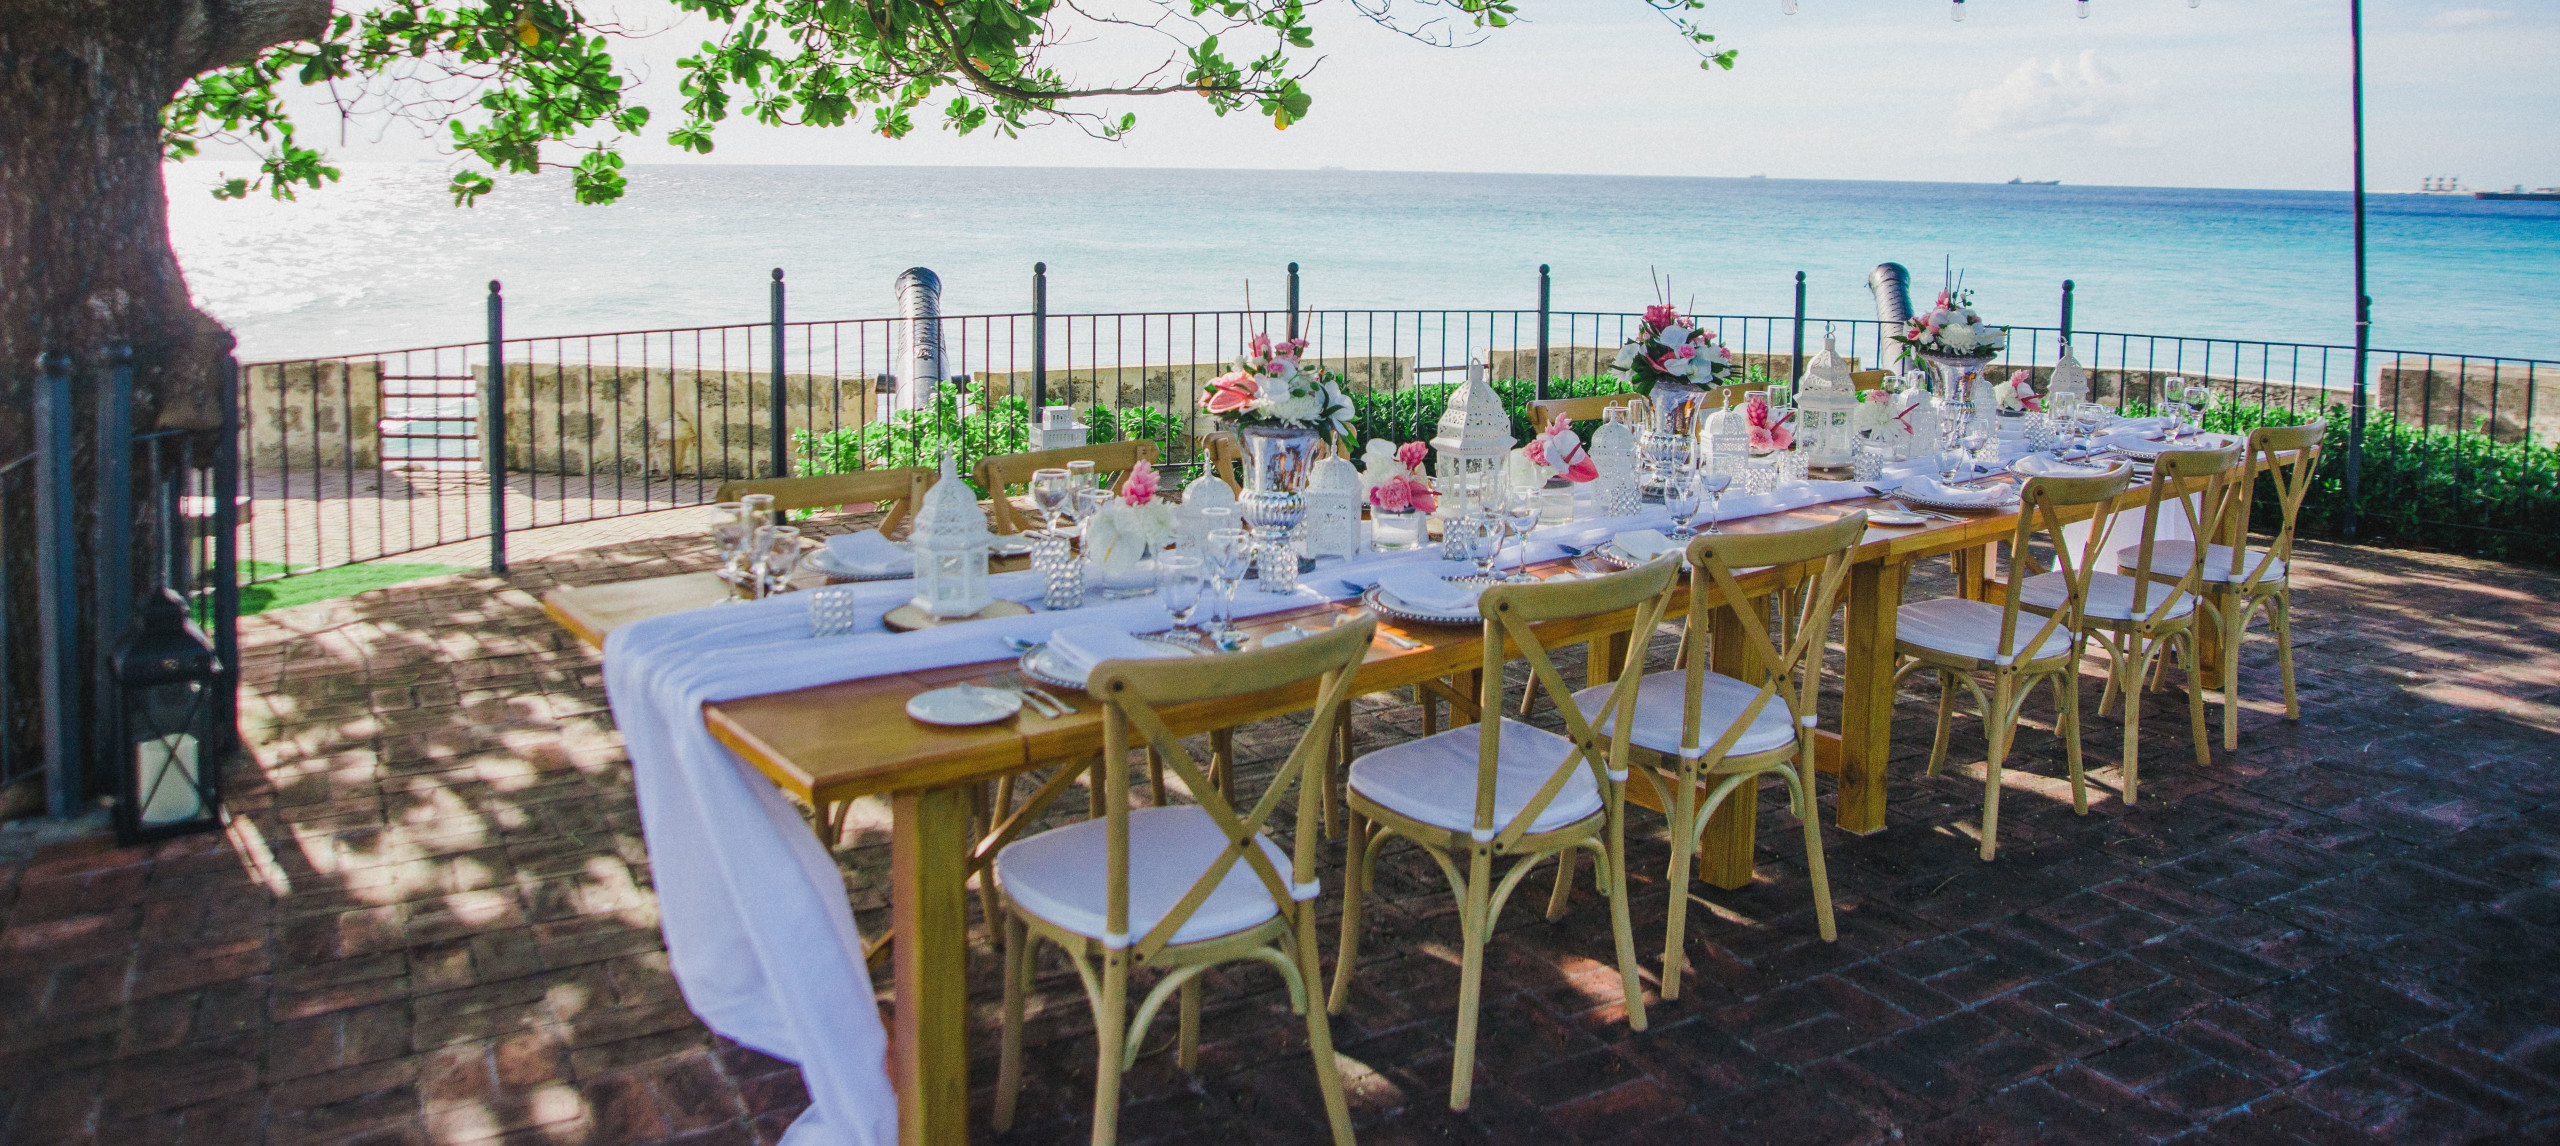 outdoor event table setting with view of water